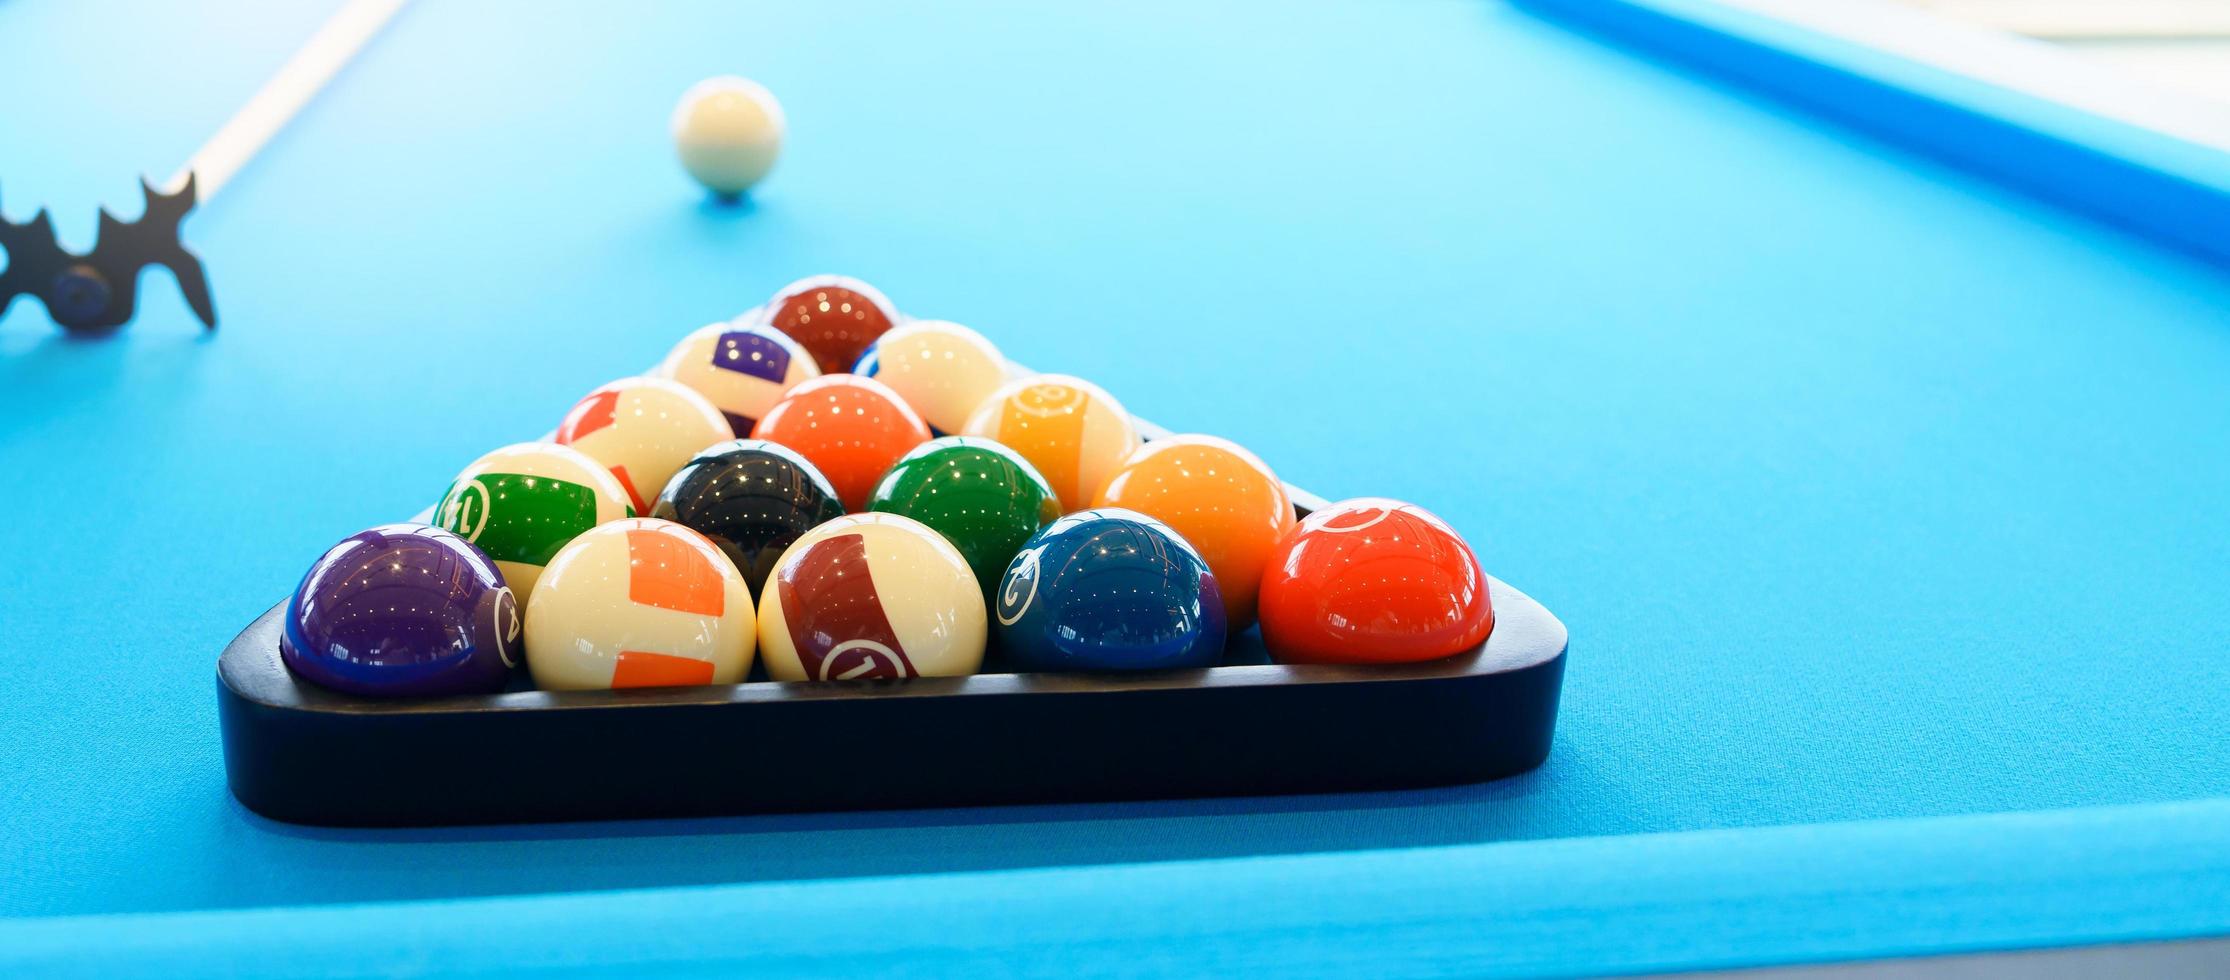 Billiard balls set on the table with a cue, snooker pool photo